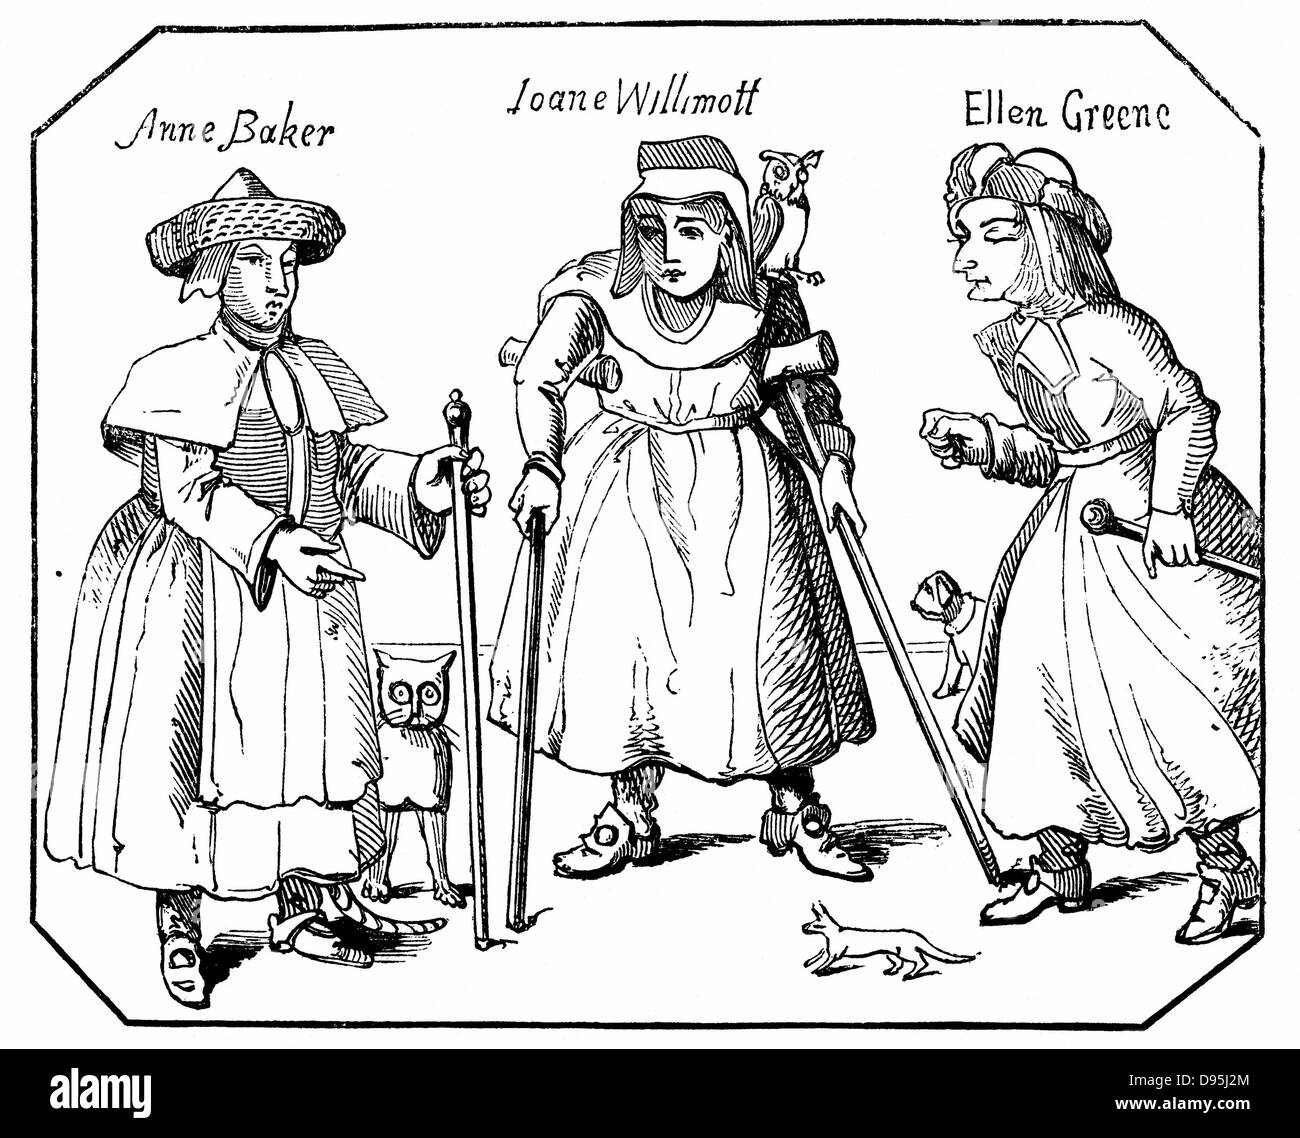 Anne Baker, Joanne Willimott and Ellen Greene, Leicestershire women with their pets and familiars. Associates of the Witches of Belvoir. Condemned to be burnt 1619: England. Engraving. Stock Photo